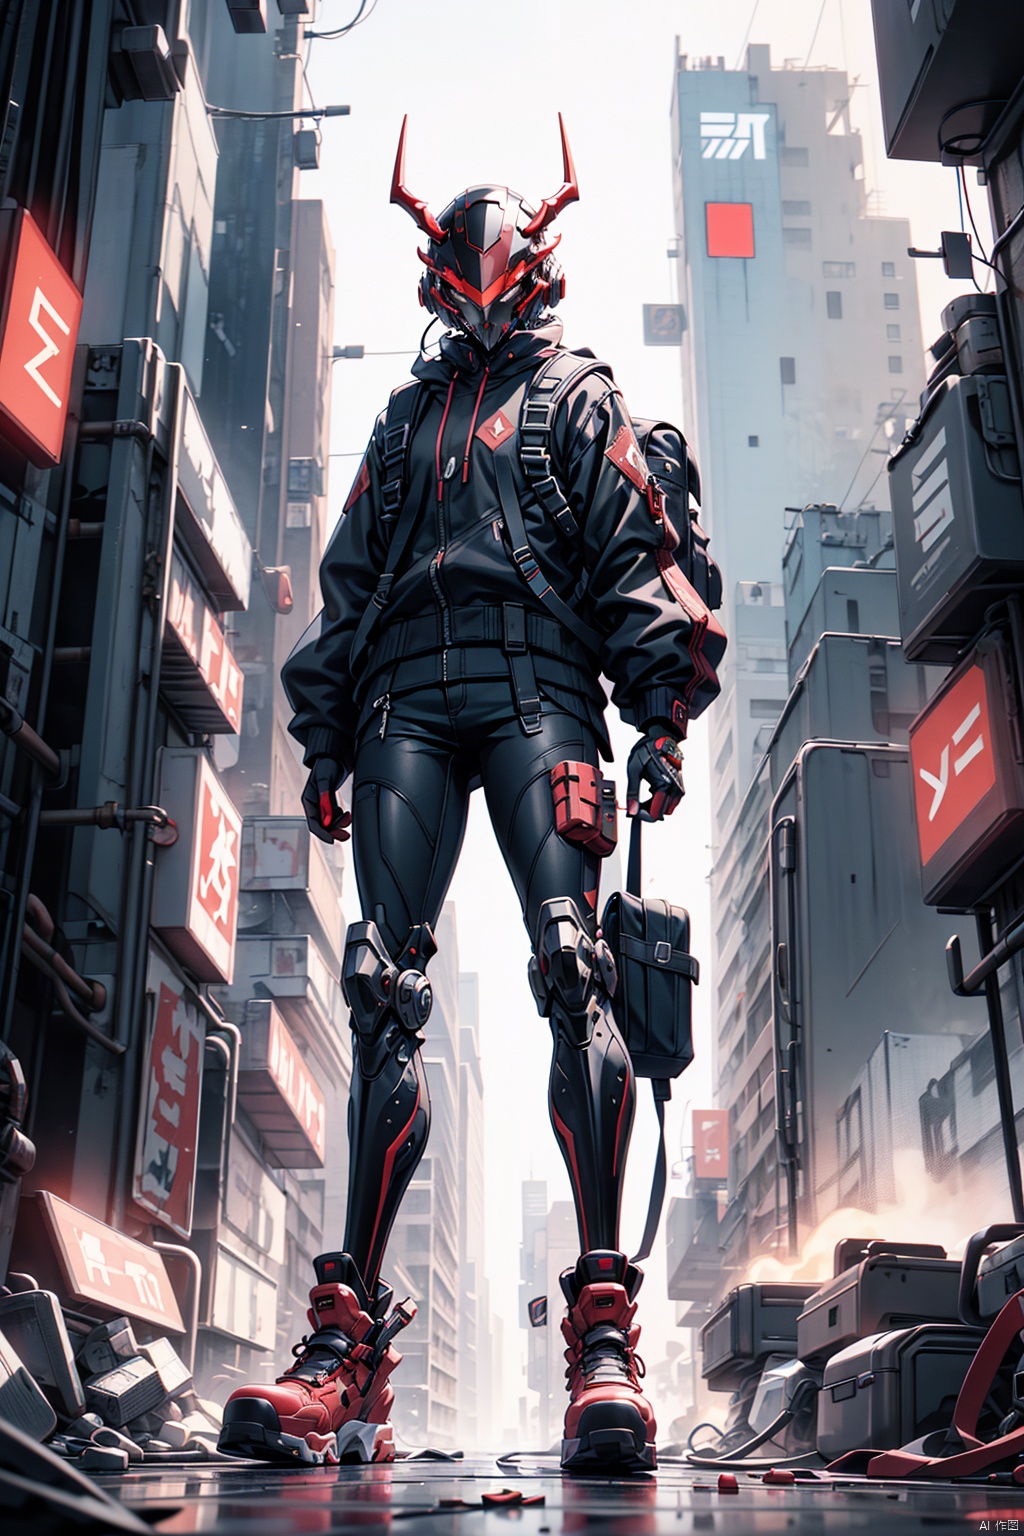 The image portrays a futuristic character adorned in a striking red and black attire. The helmet is equipped with horns and has multiple attachments, while the backpack is large and red with symbols and a large blade. The character's shoes are white with red accents, and the overall design exudes a cyberpunk or dystopian aesthetic
